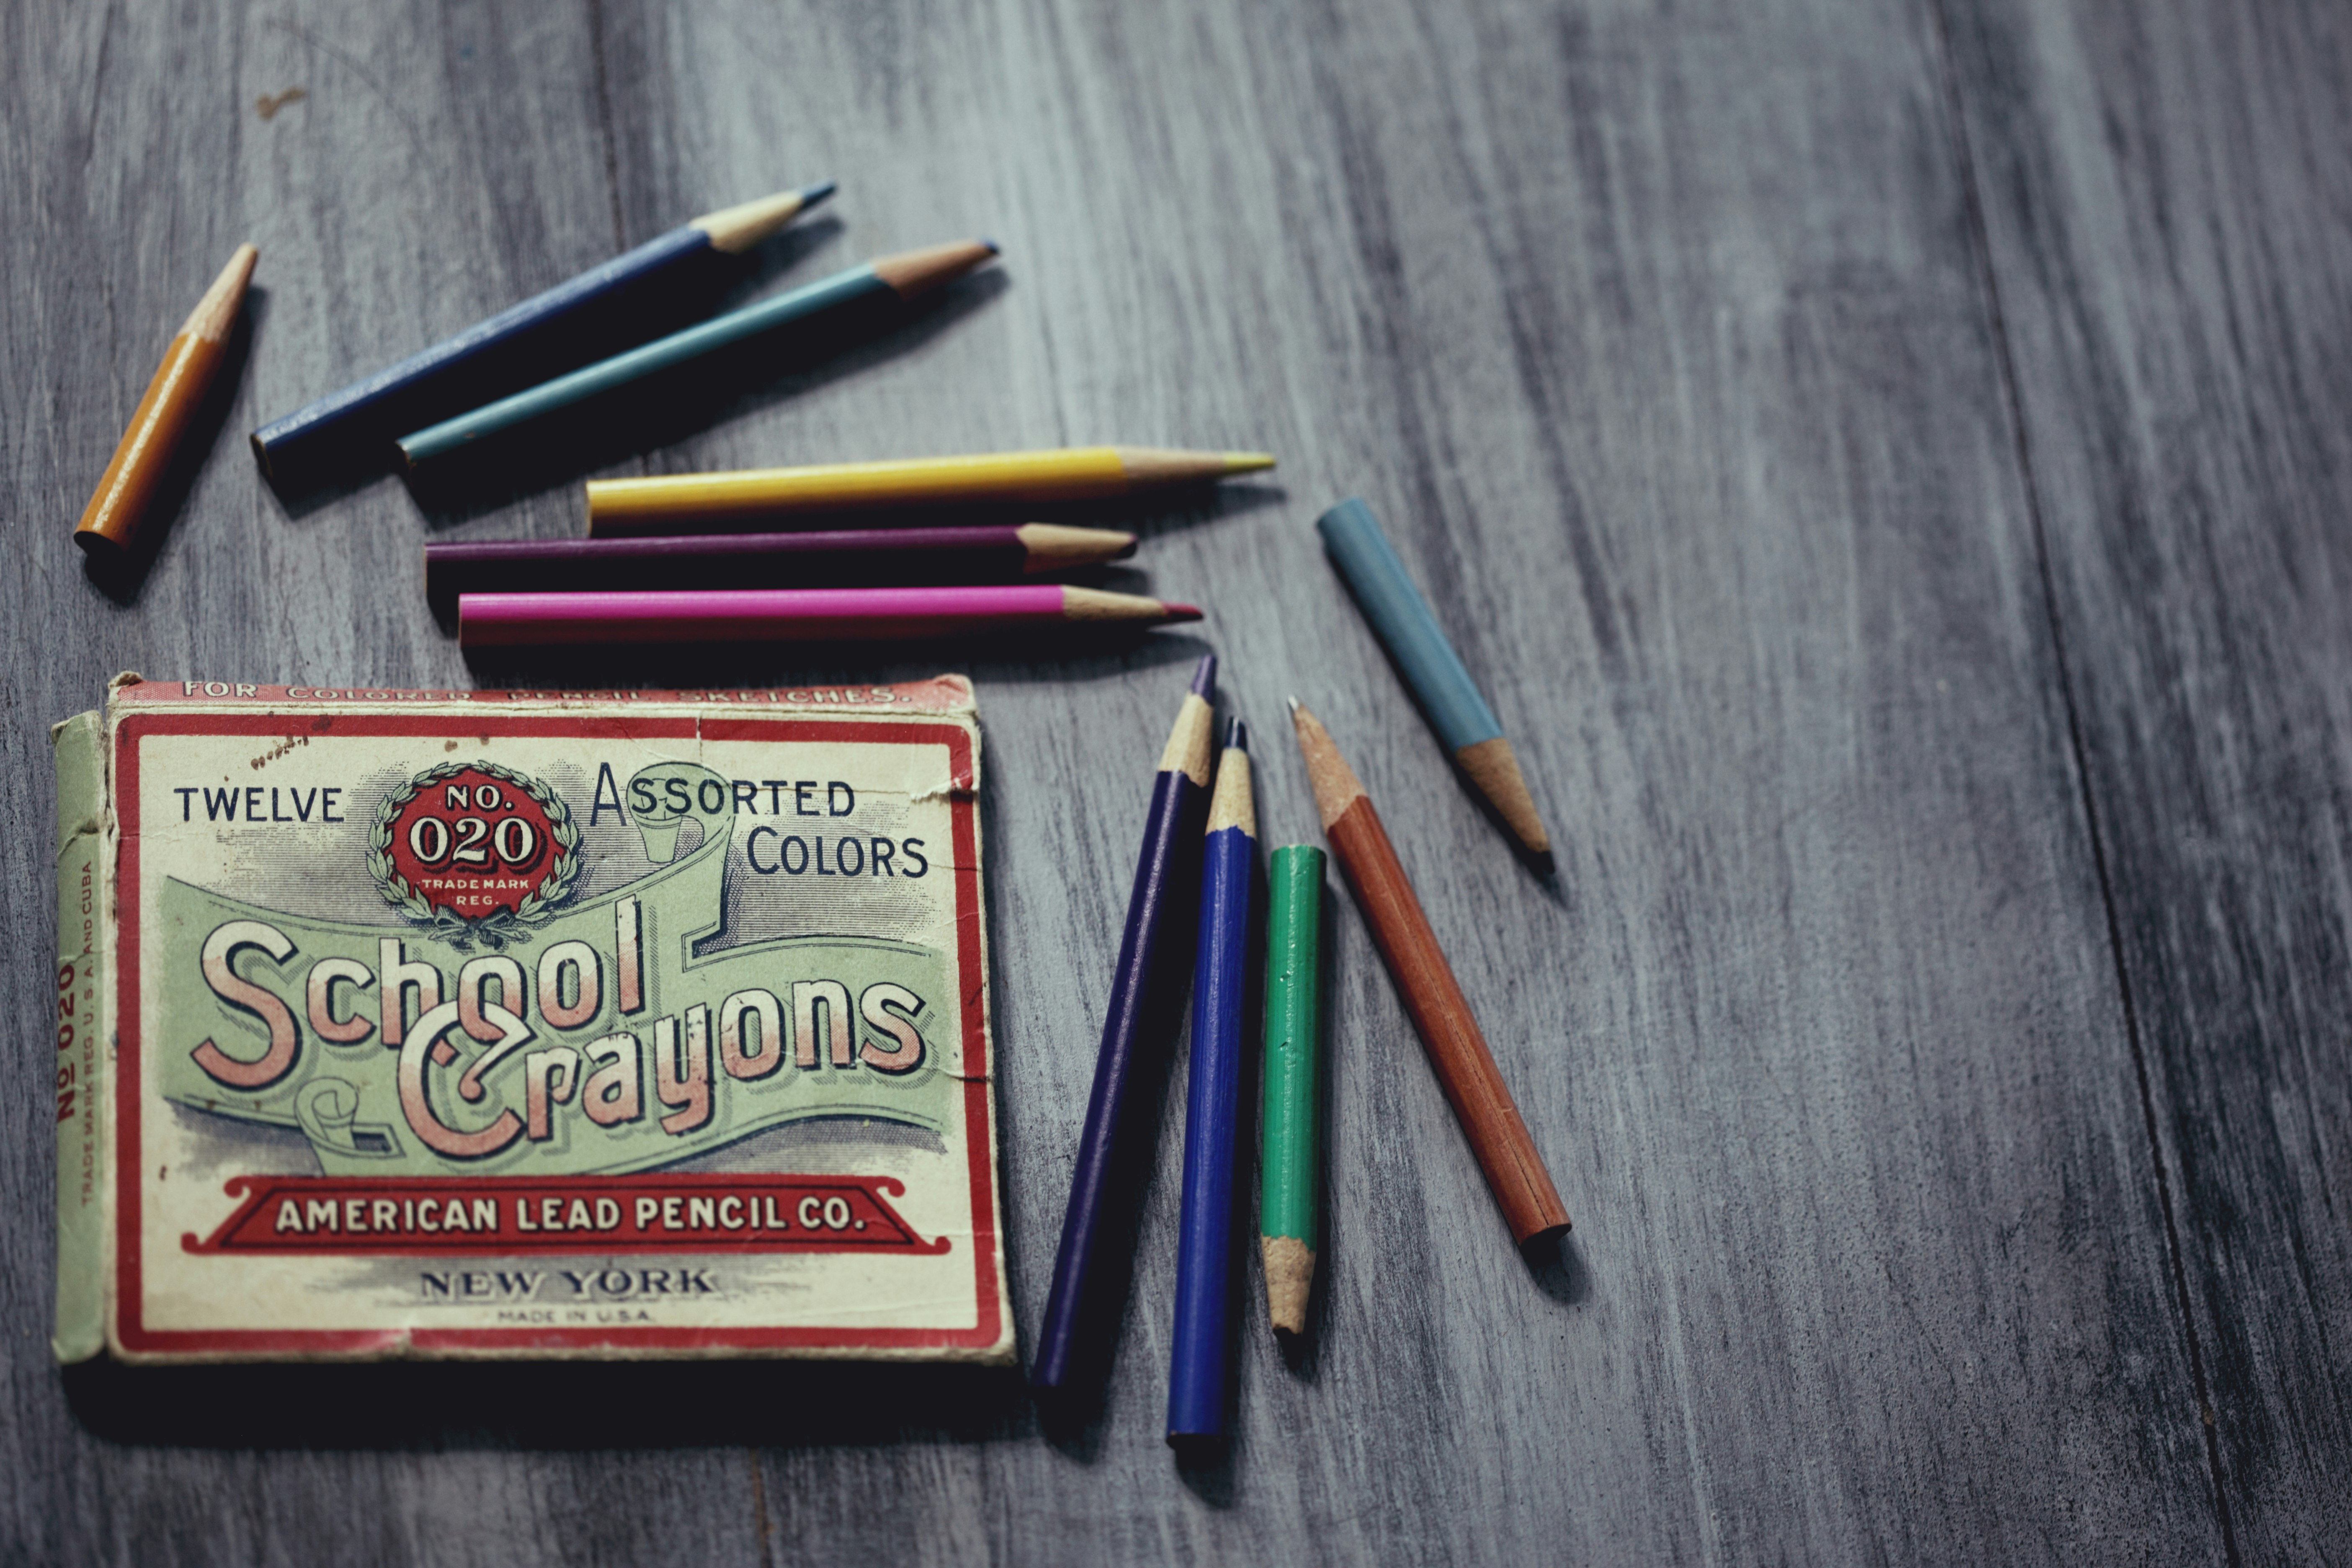 A vintage box of colored pencils that belonged to my great aunt Pauline. She went to art school in the late 1930s. She also played guitar, loved to sing, and cooked a mean breakfast!